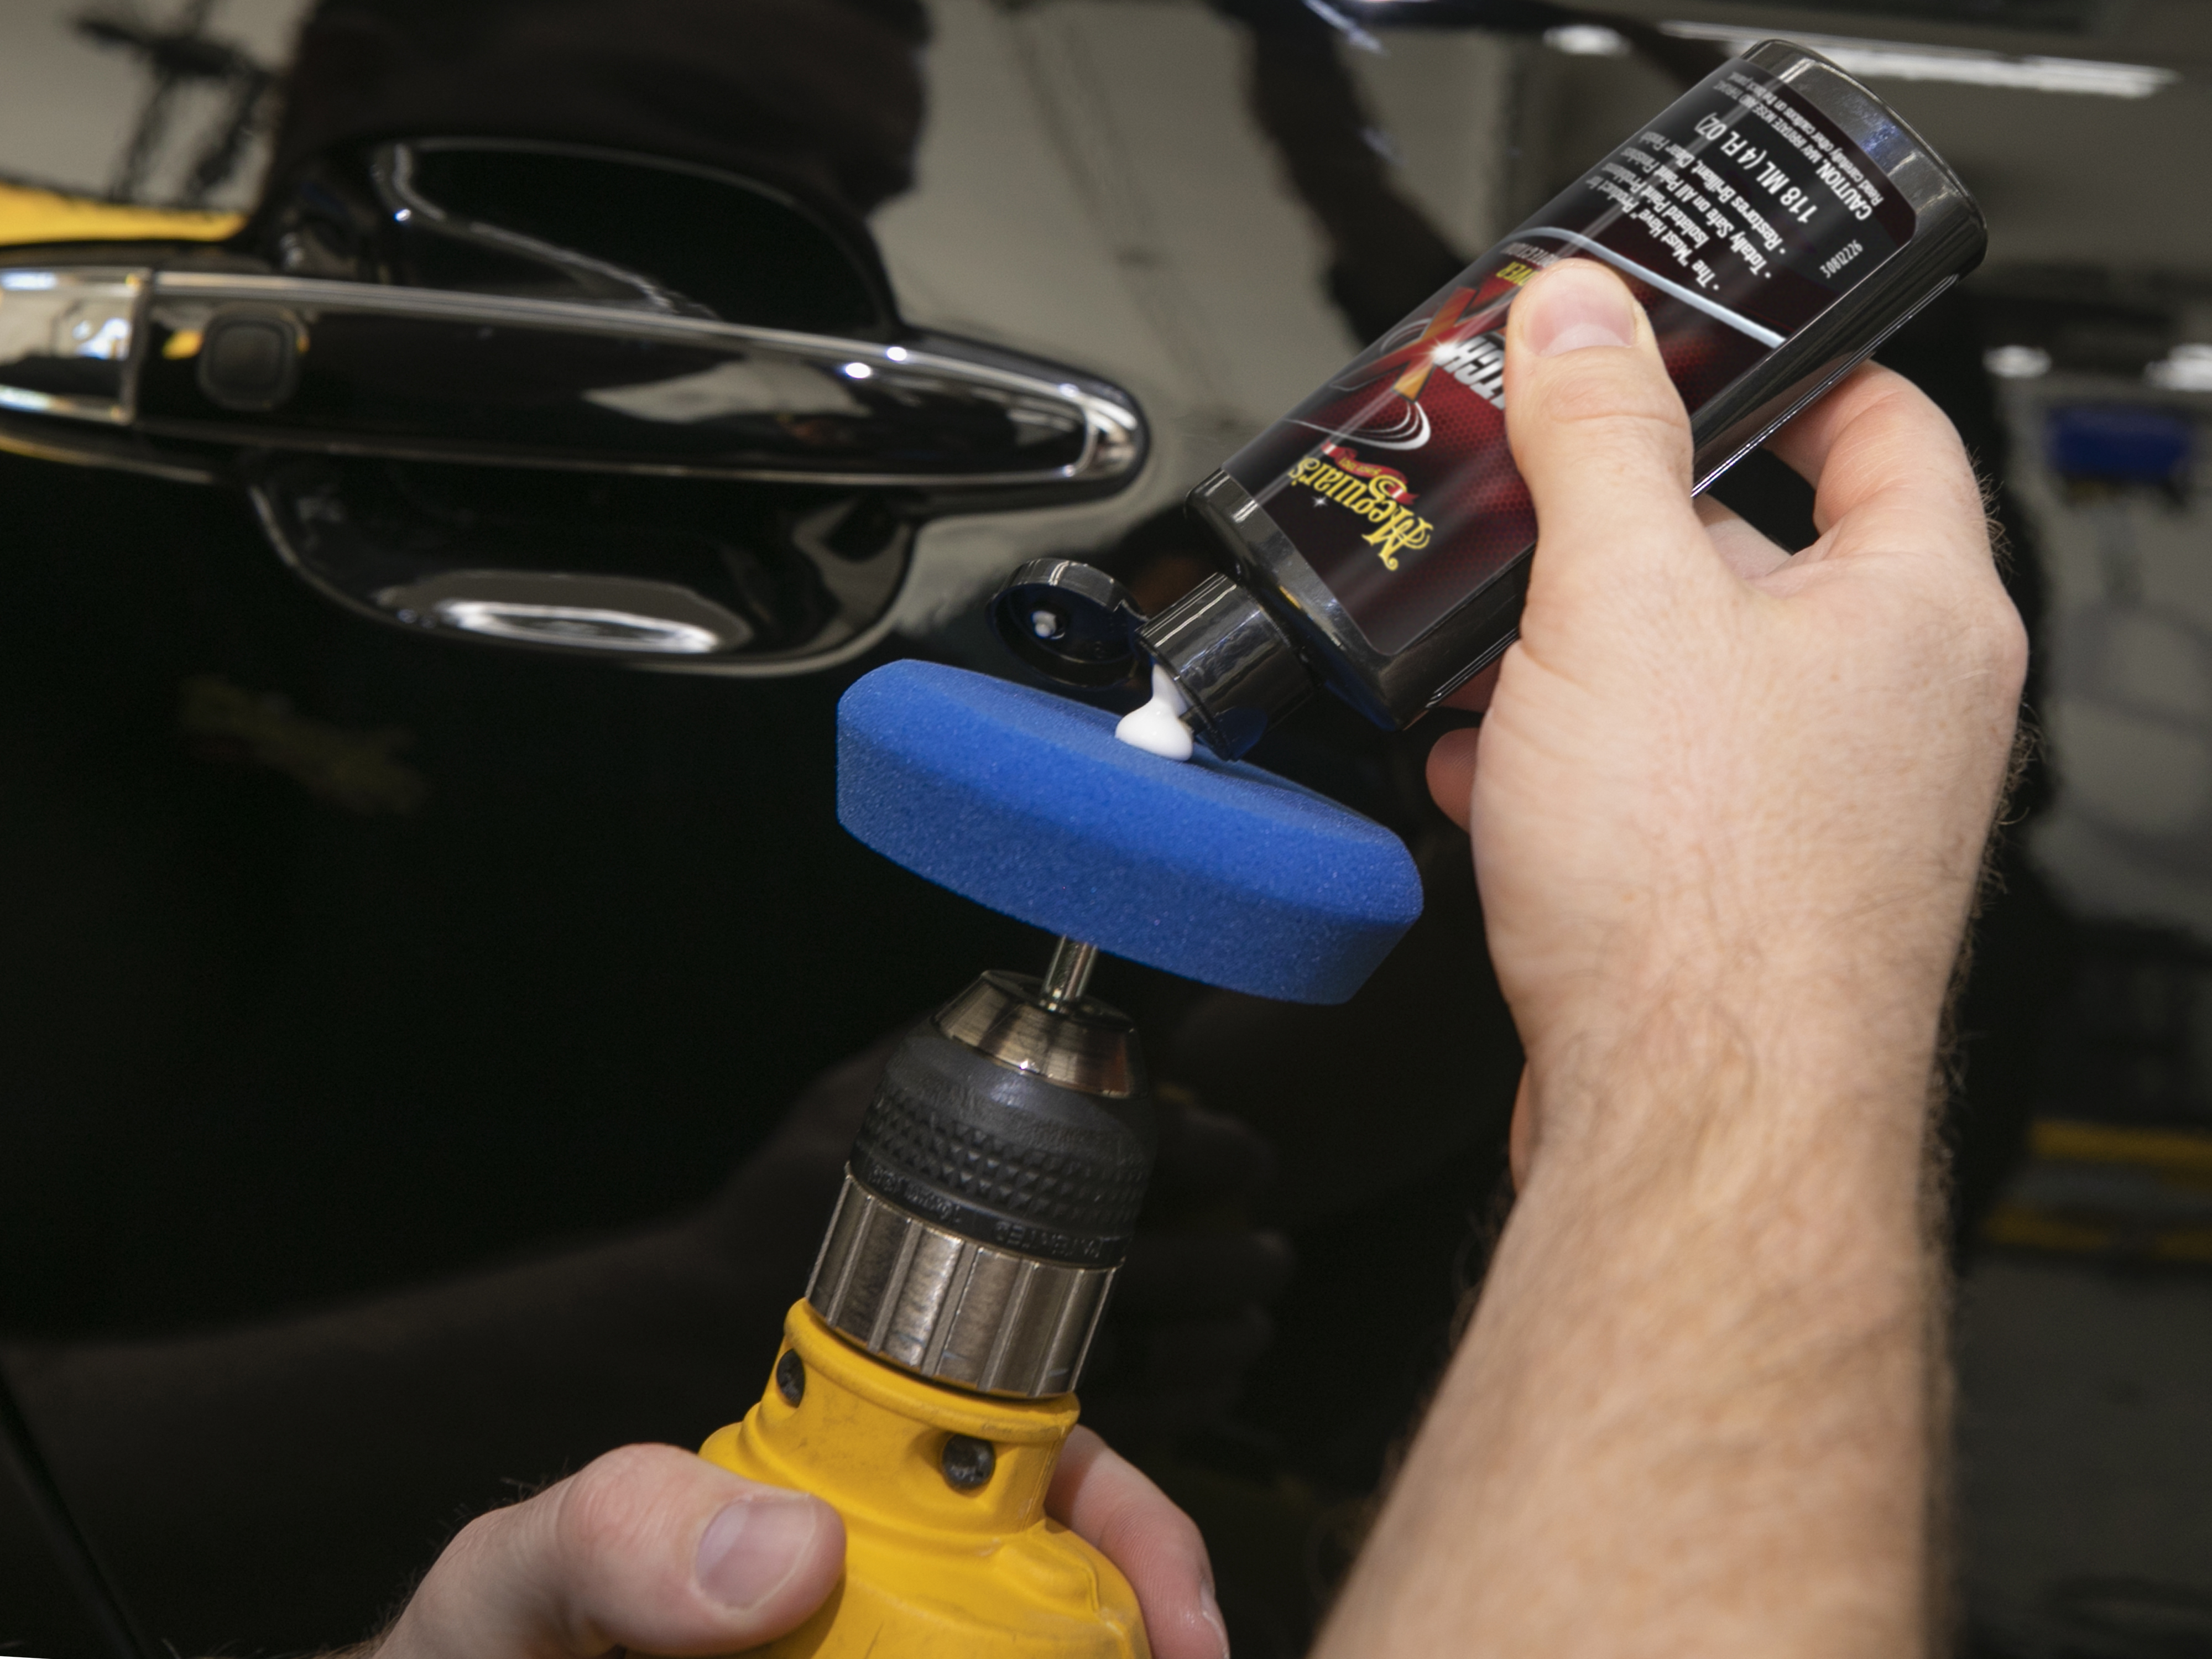 Meguiar's - Meguiar's Scratch Eraser Kit provides EVERYTHING you need  (except the drill) to quickly and HIGHLY EFFECTIVELY remove swirls, minor  scratches and scuffs with EASE! 👊